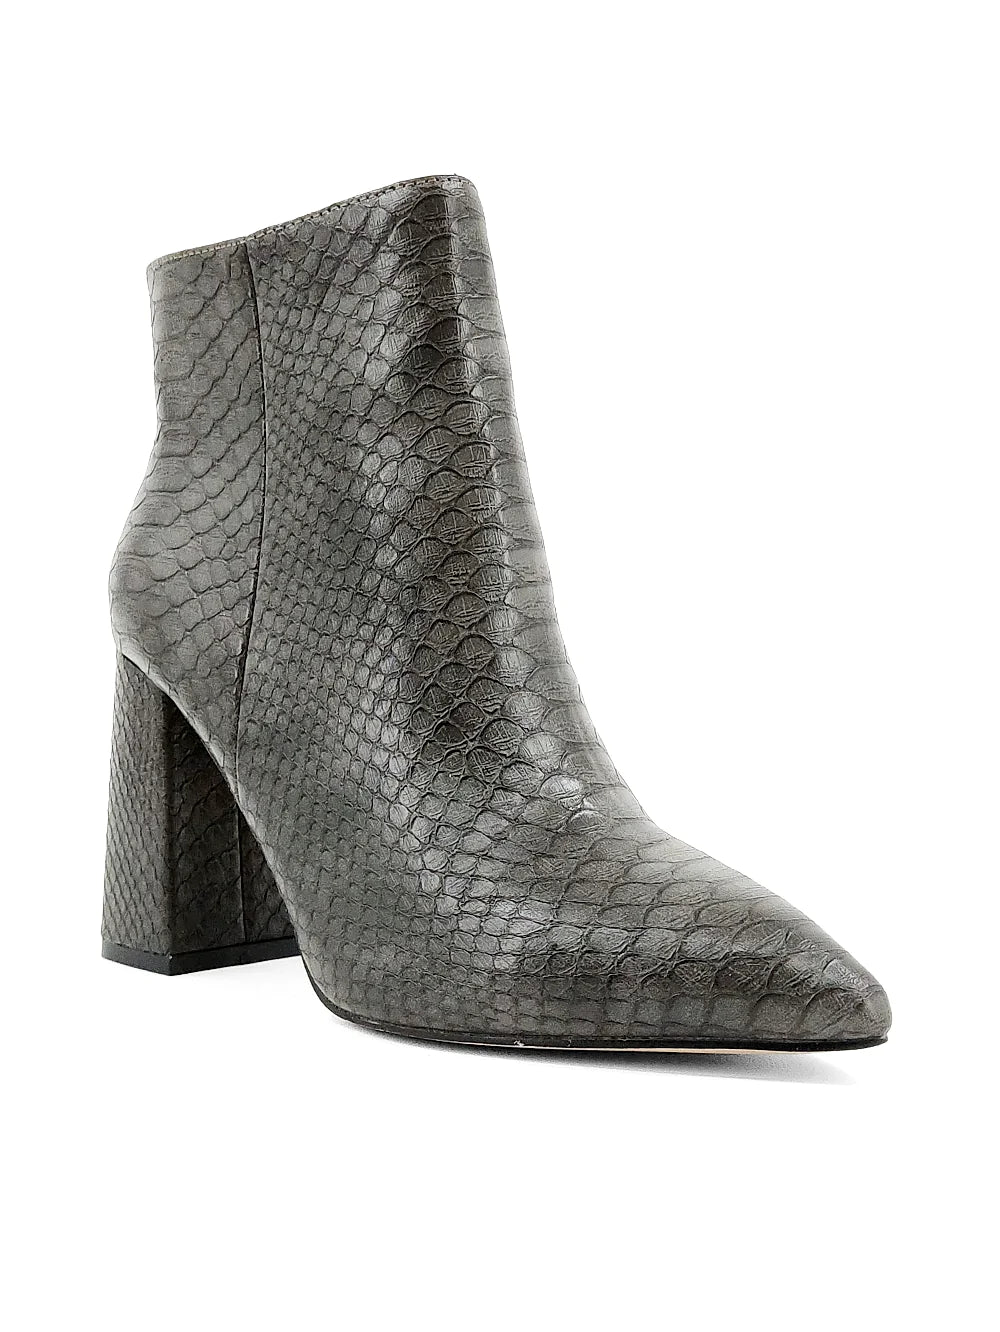 Veronica Boots in Grey Snake